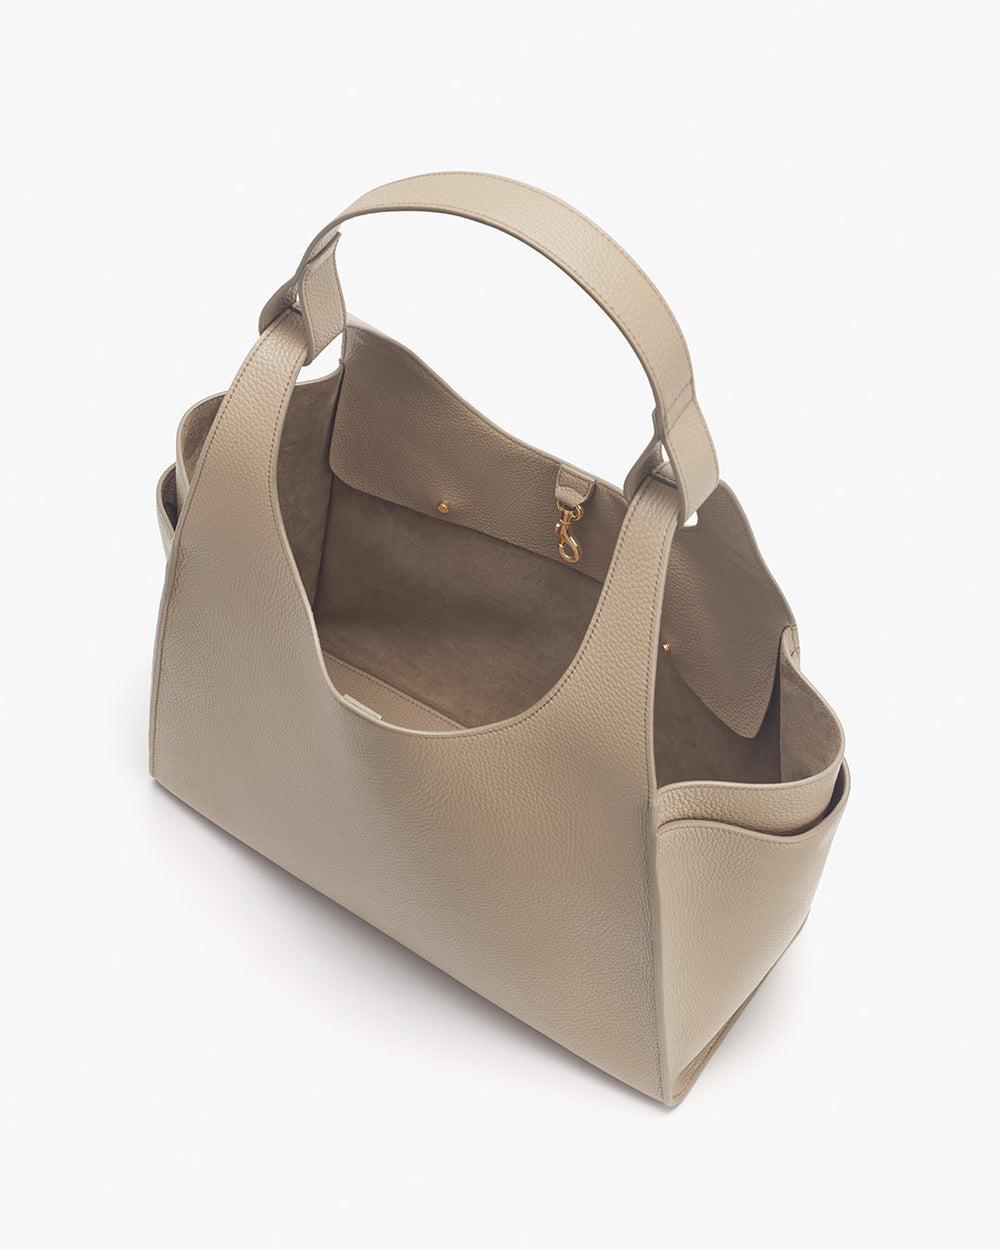 Open tote bag with interior compartments and curved handle.